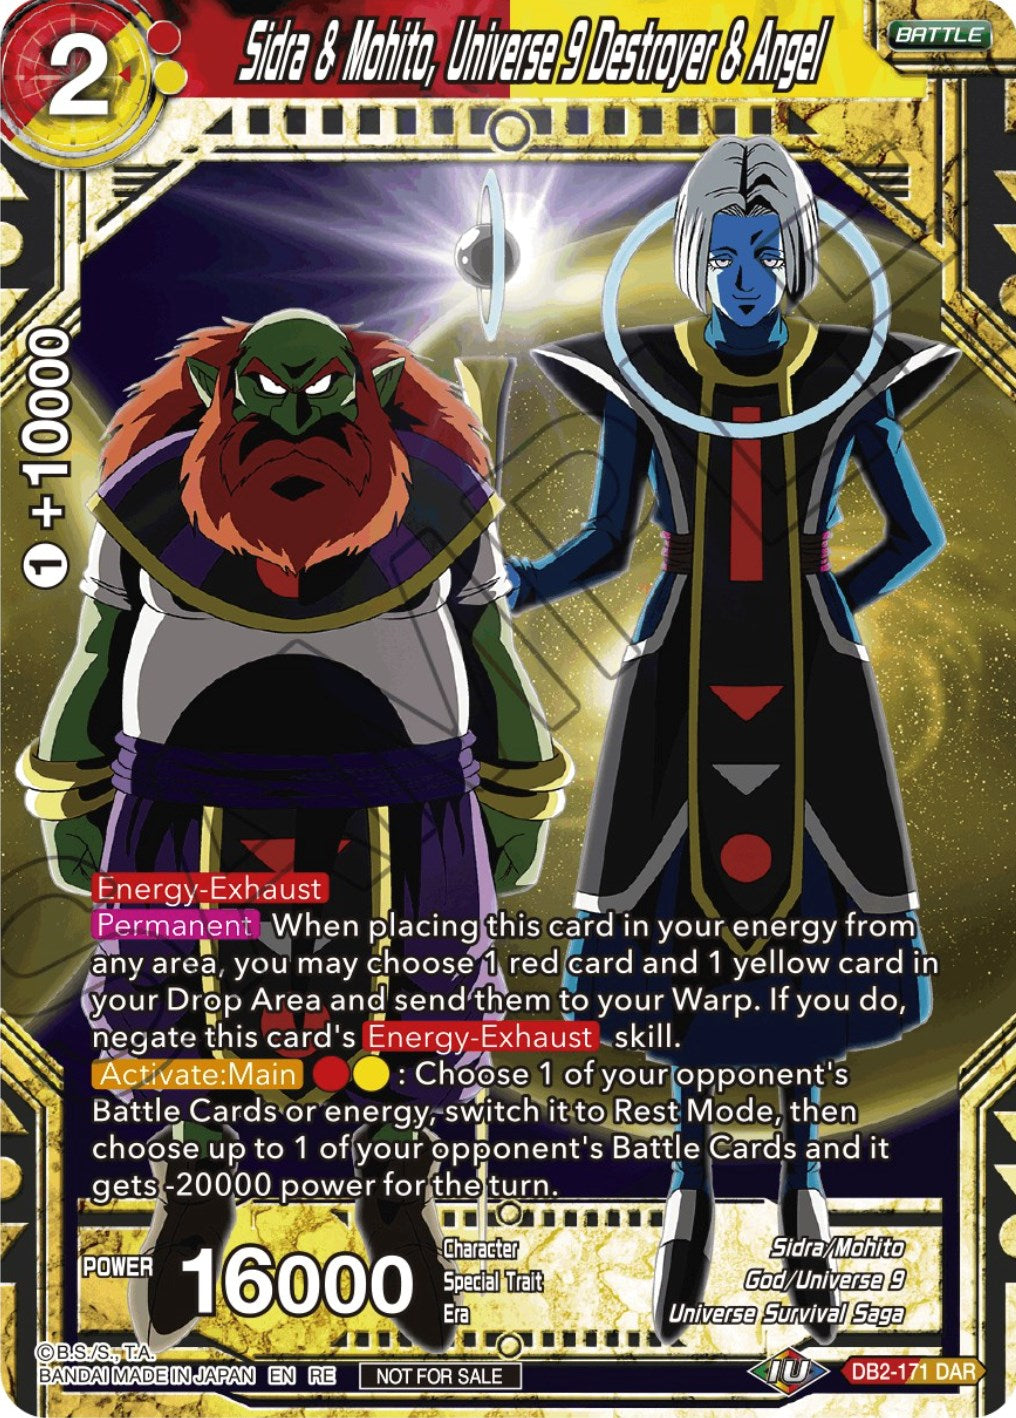 Sidra & Mohito, Universe 9 Destroyer & Angel (Championship Selection Pack 2023 Vol.2) (Silver Foil) (DB2-171) [Tournament Promotion Cards] | Amazing Games TCG